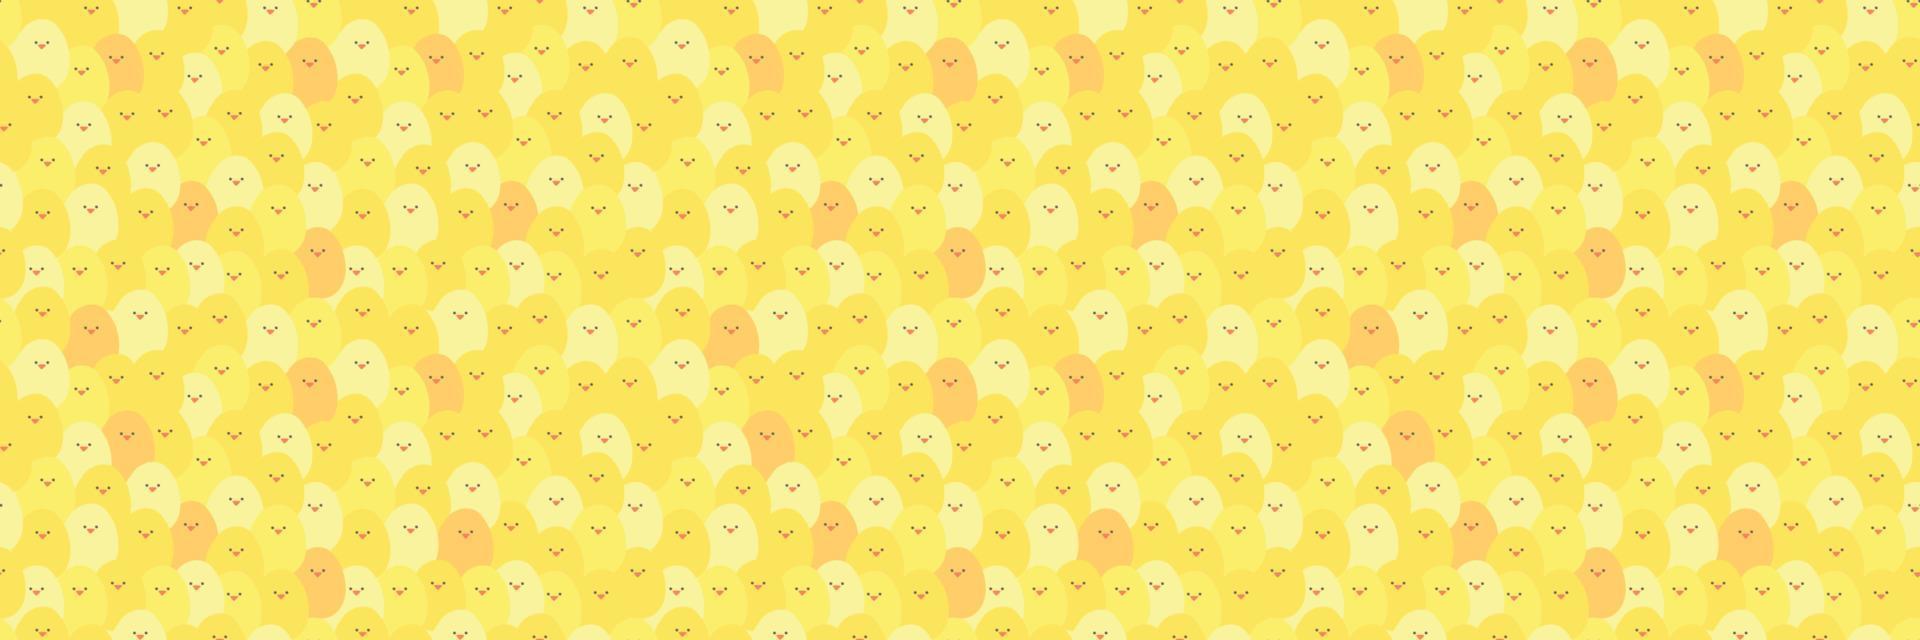 Cute seamless pattern about farm live with crowd of chikens. Bright cartoon vector summer horizontal background.  wallpaper, fills, kid design.  little fat yellow Easter chicken